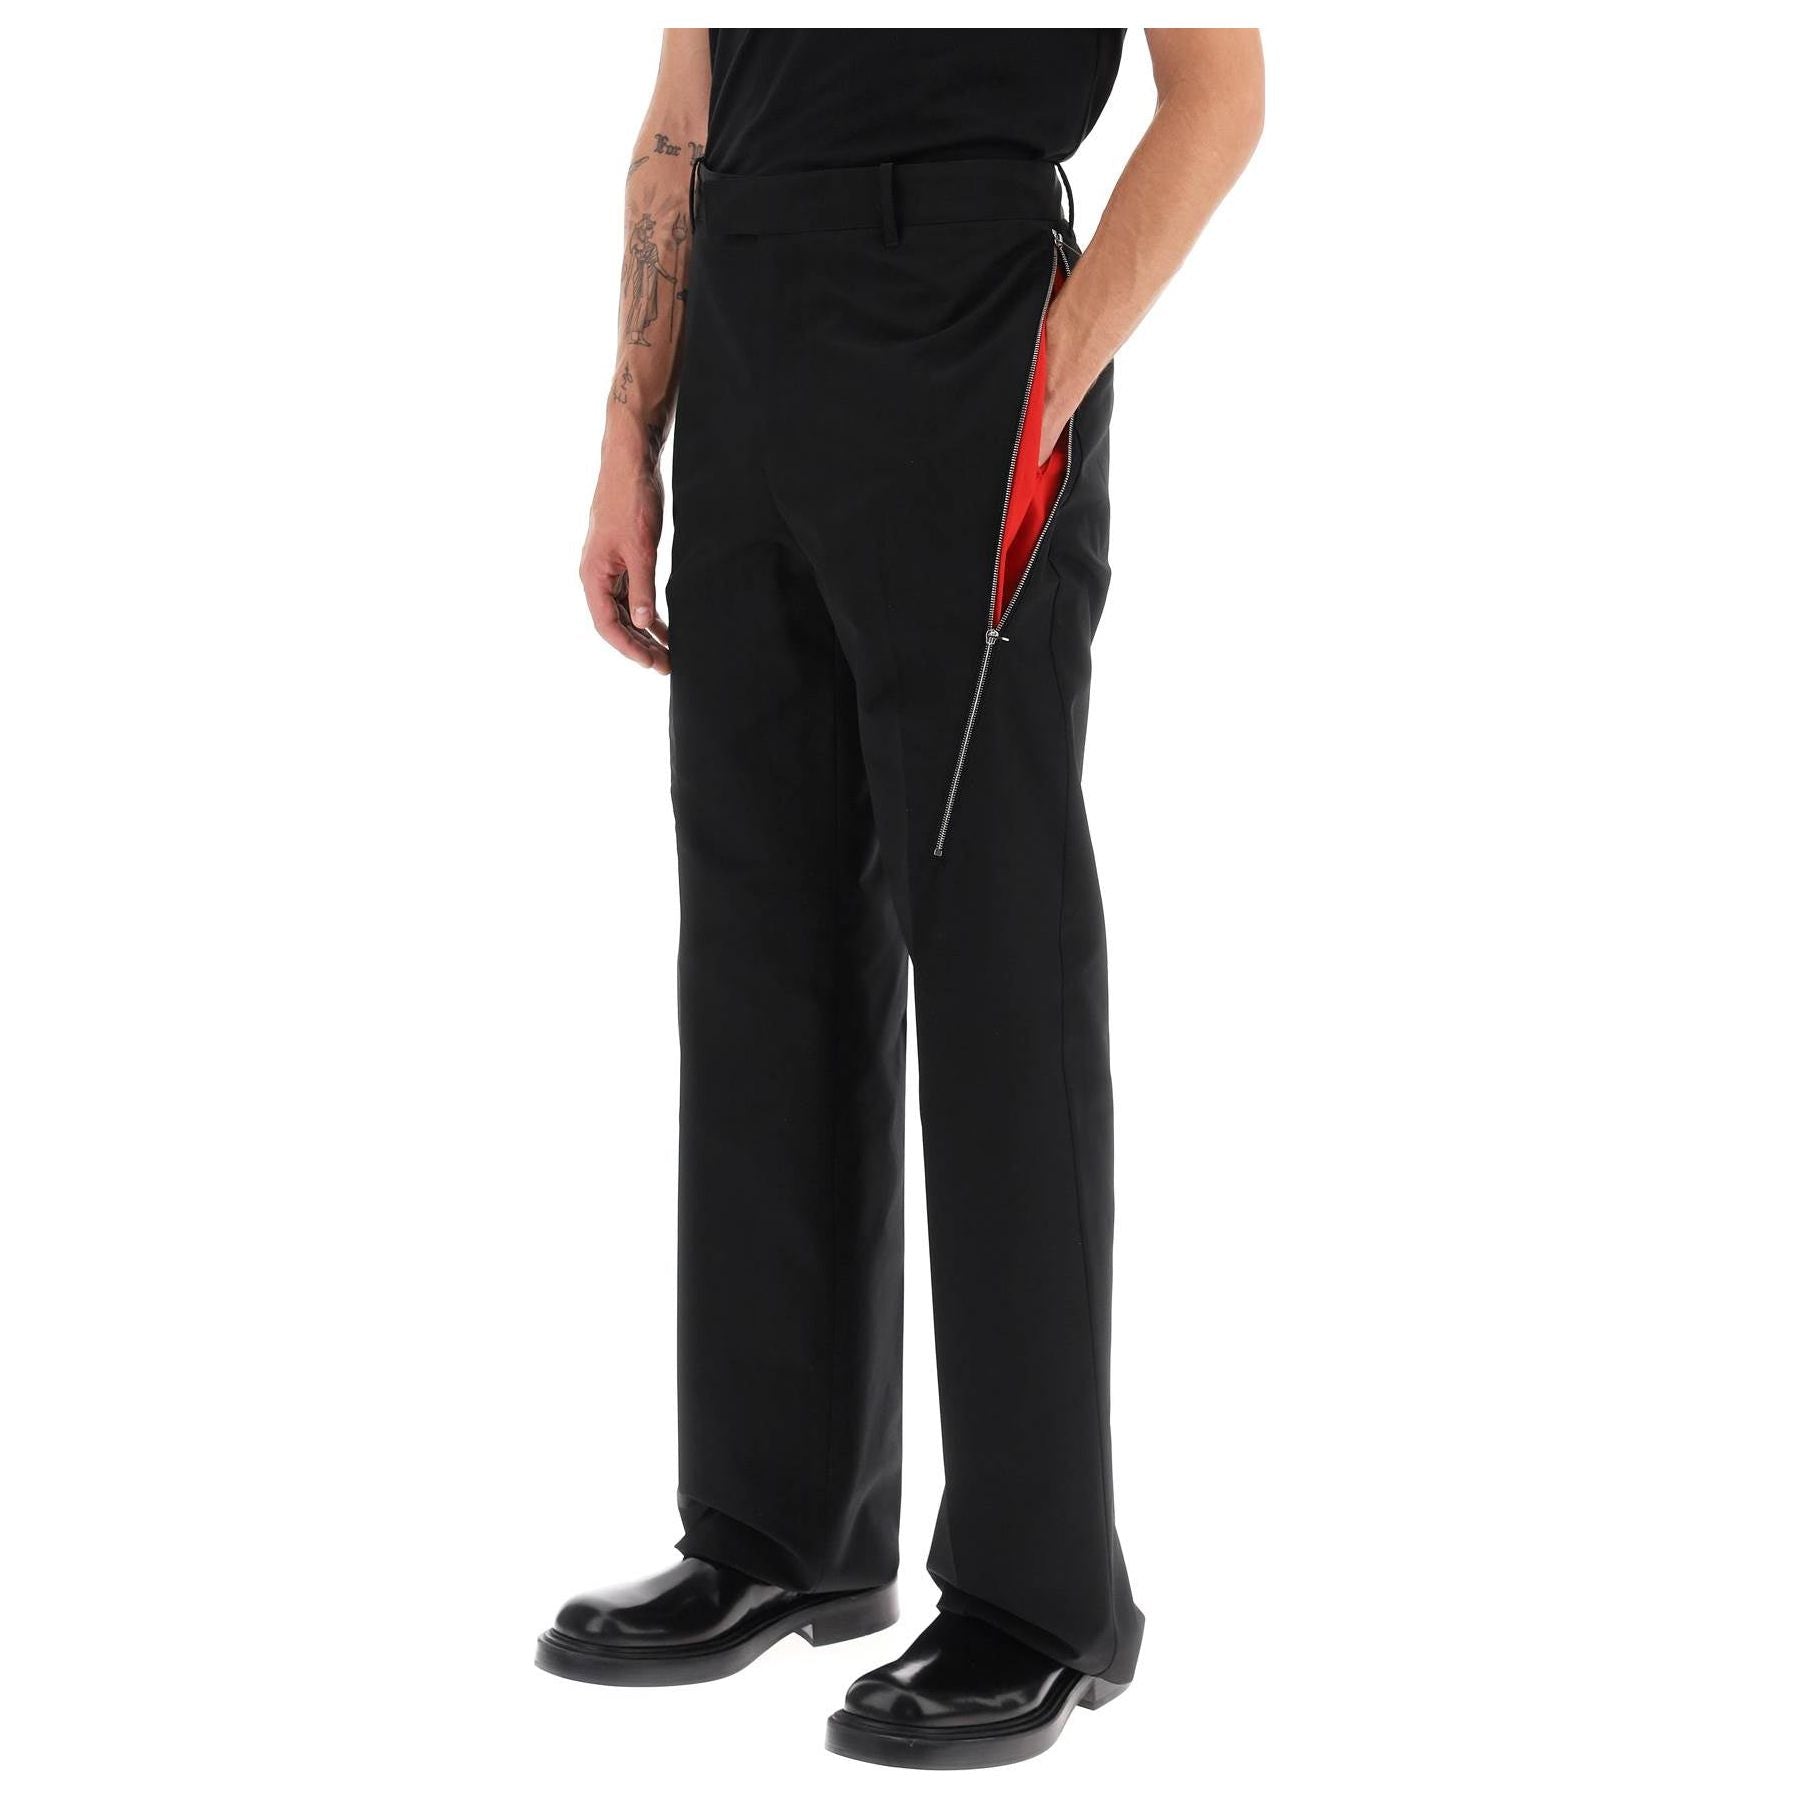 Pants With Contrasting Inserts